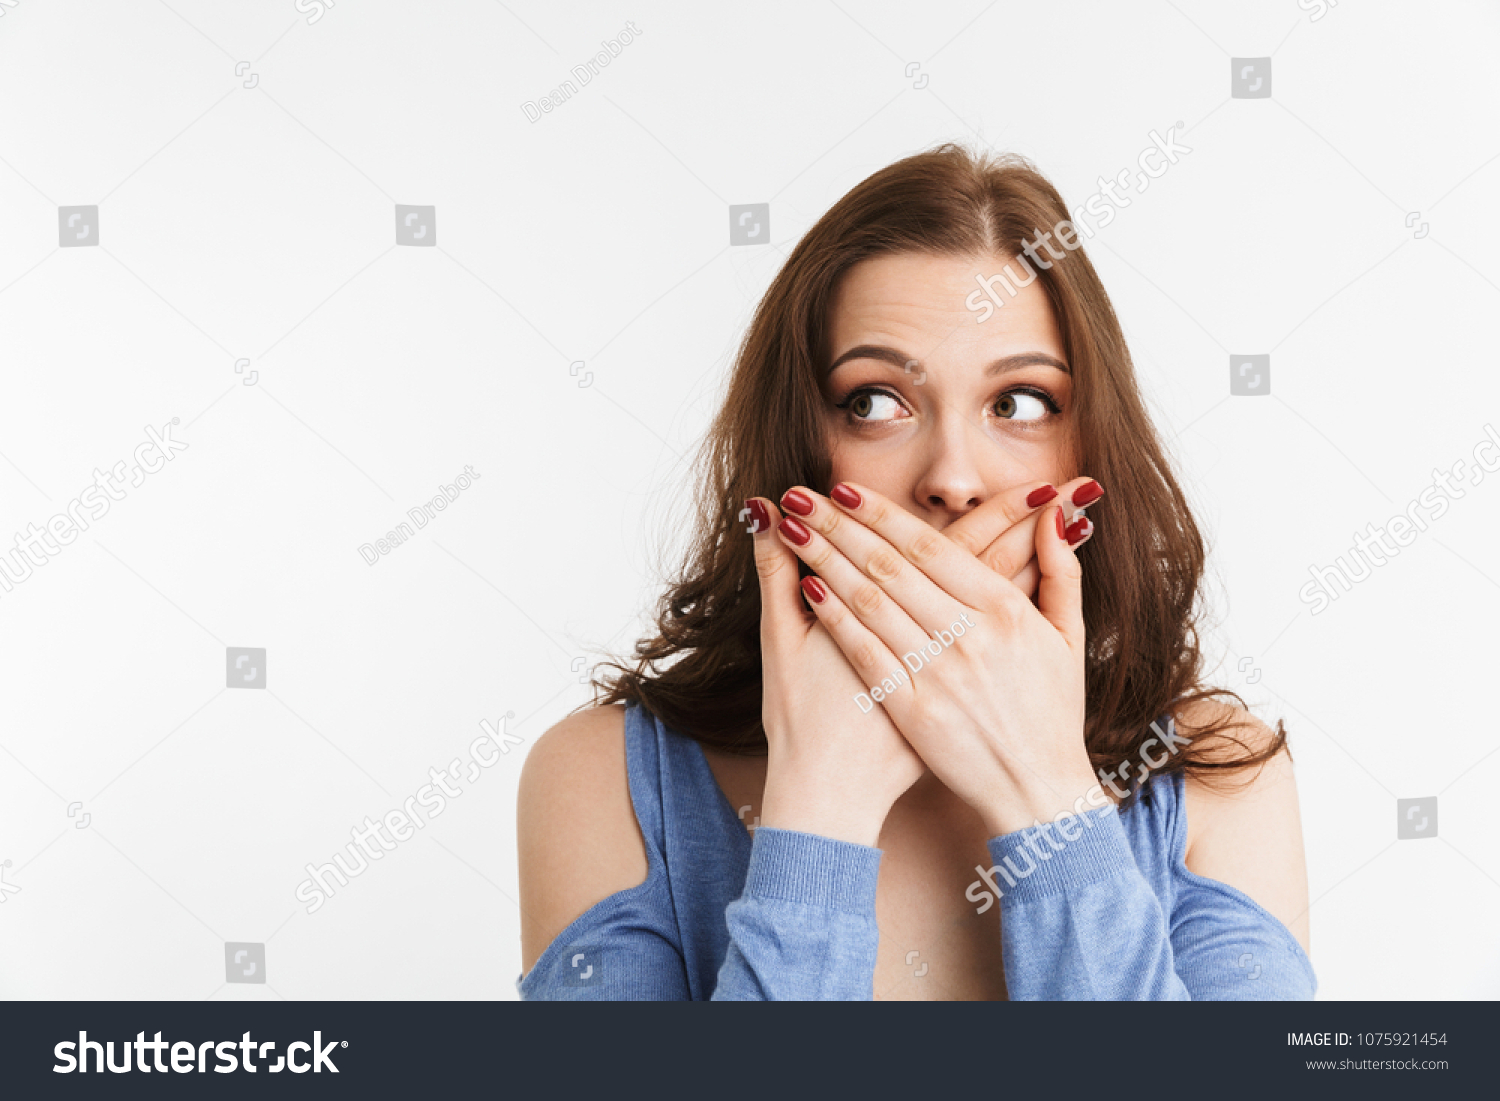 Portrait of a surprised young woman covering mouth with hands isolated over white background #1075921454